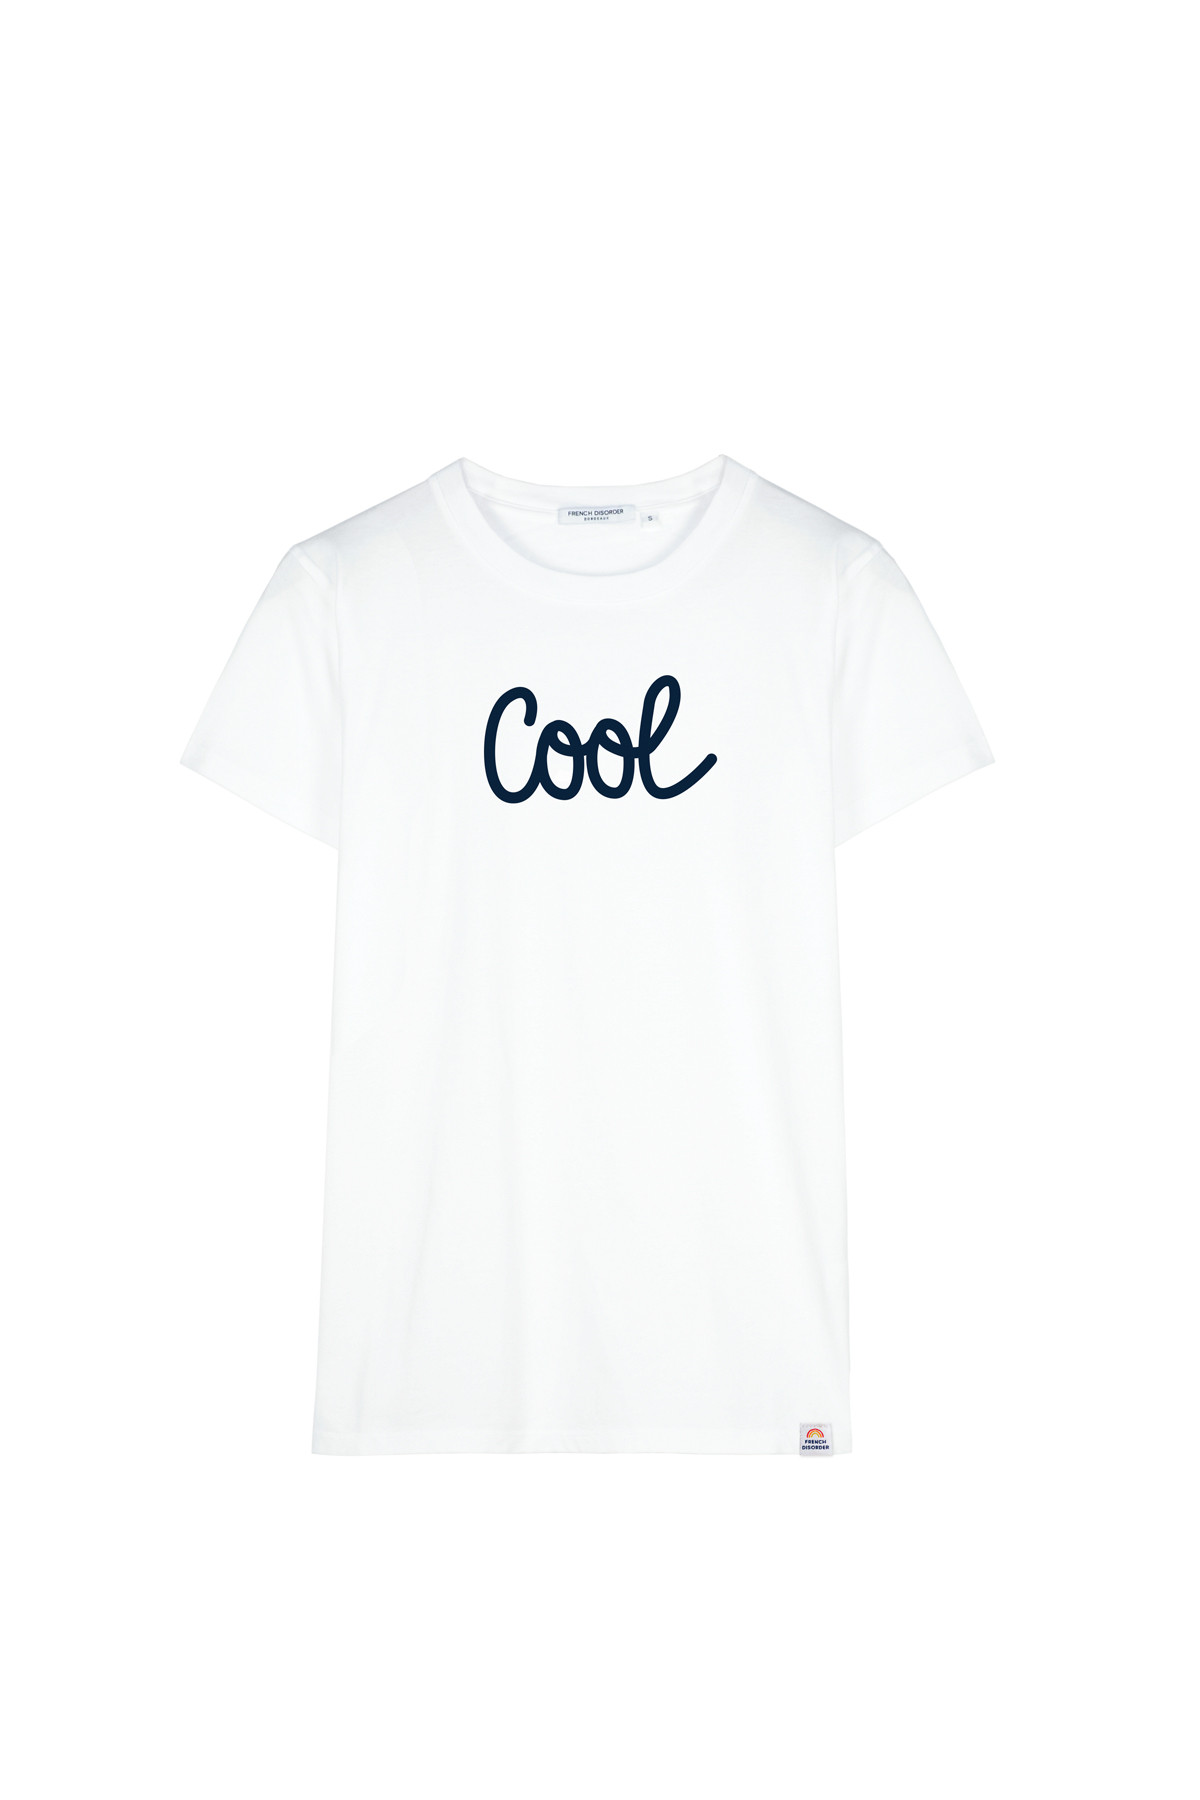 T-shirt COOL French Disorder